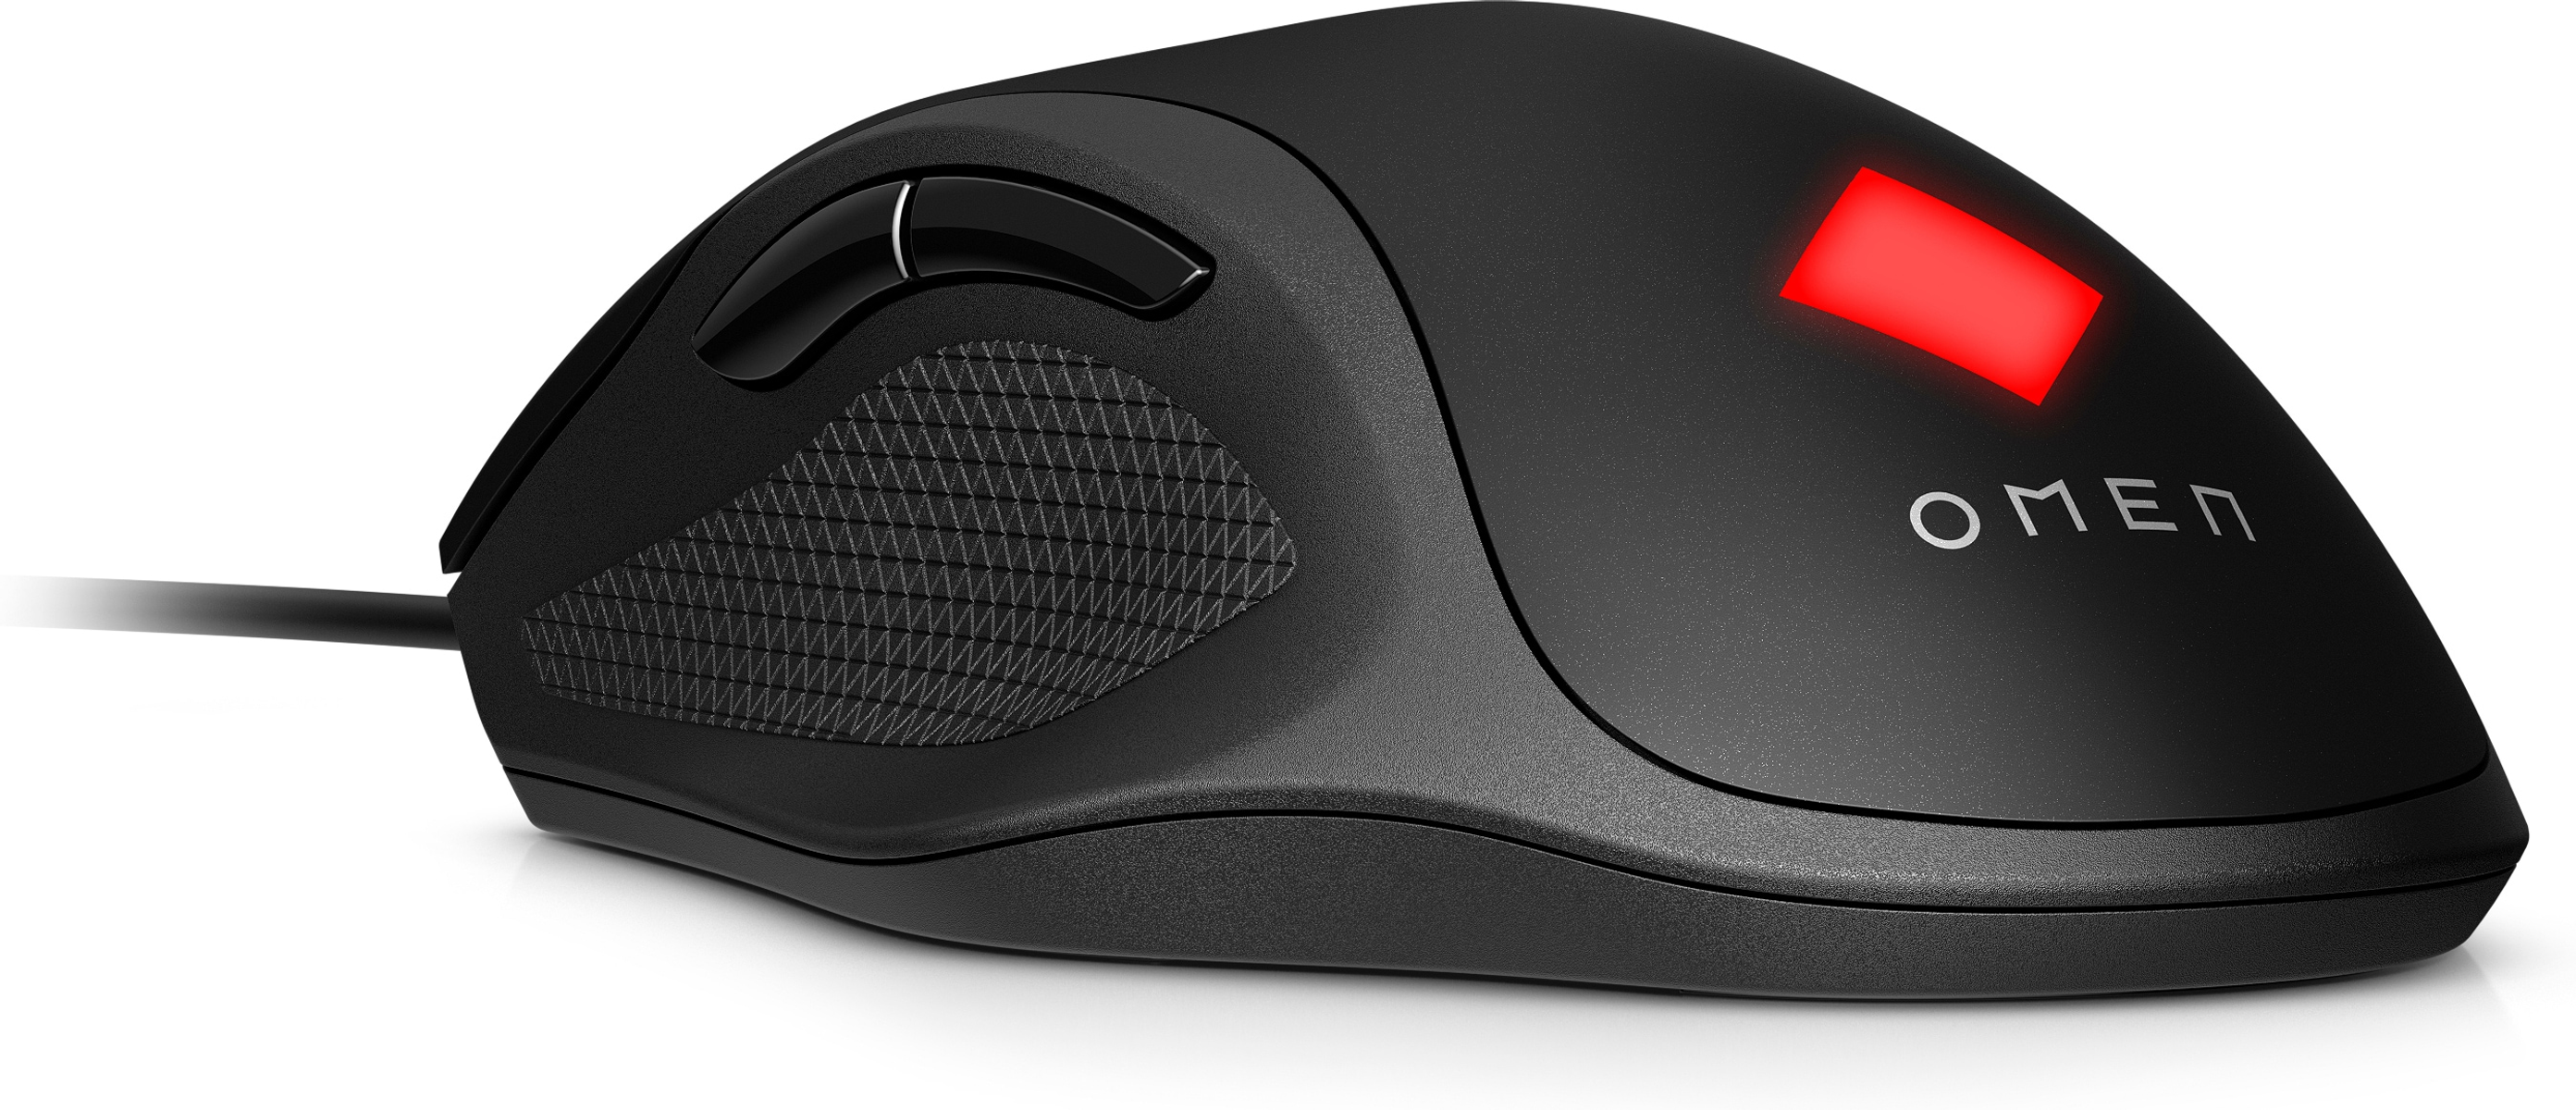 HP ESSENTIAL VECTOR 8BC52AA OMEN Gaming-Maus, GAMING MOUSE Schwarz